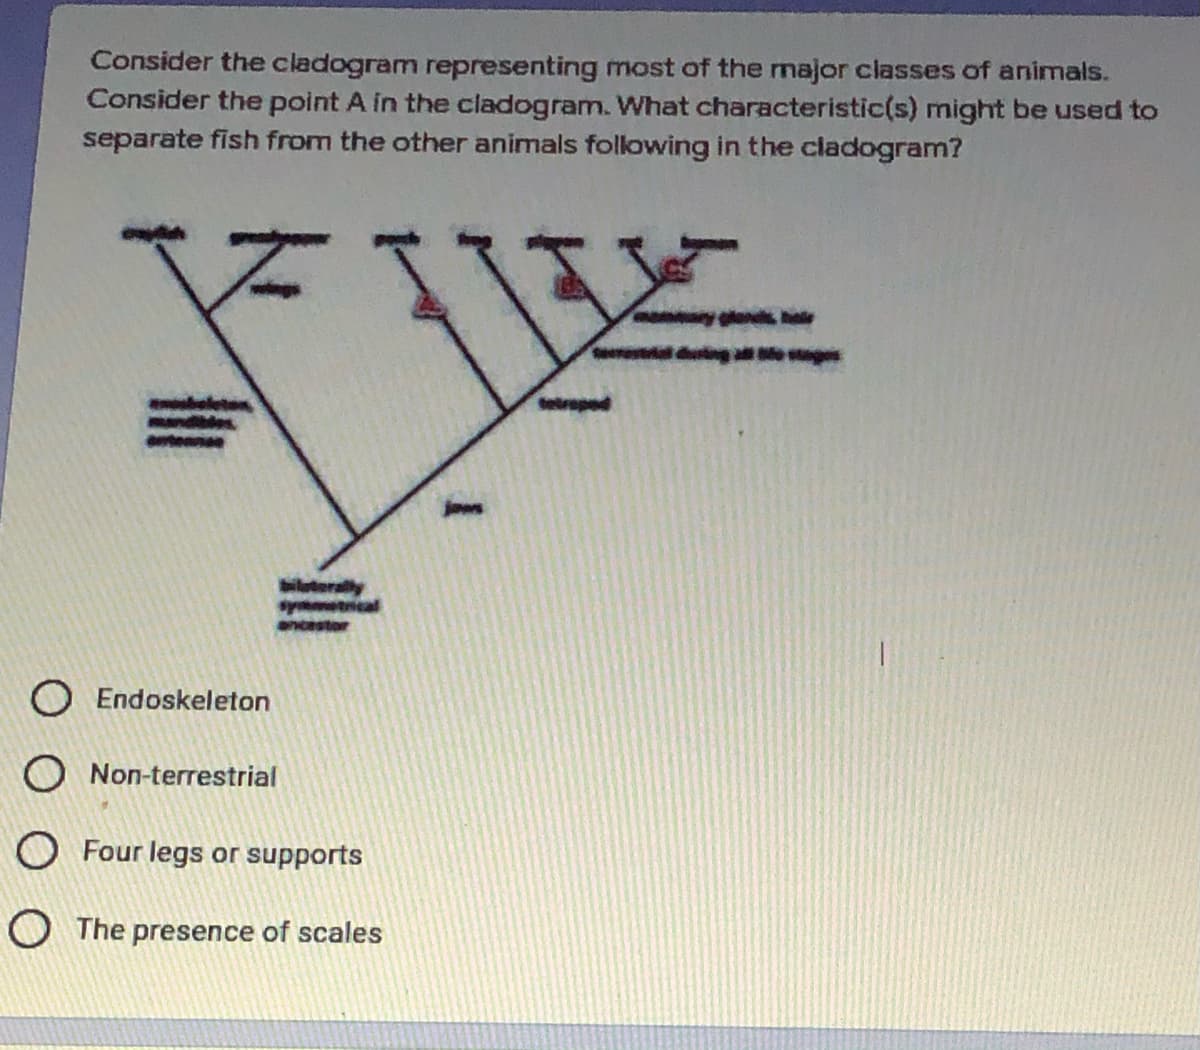 Consider the cladogram representing most of the major classes of animals.
Consider the point A in the cladogram. What characteristic(s) might be used to
separate fish from the other animals following in the cladogram?
hale
symmetnical
ancestor
O Endoskeleton
O Non-terrestrial
O Four legs or supports
O The presence of scales
